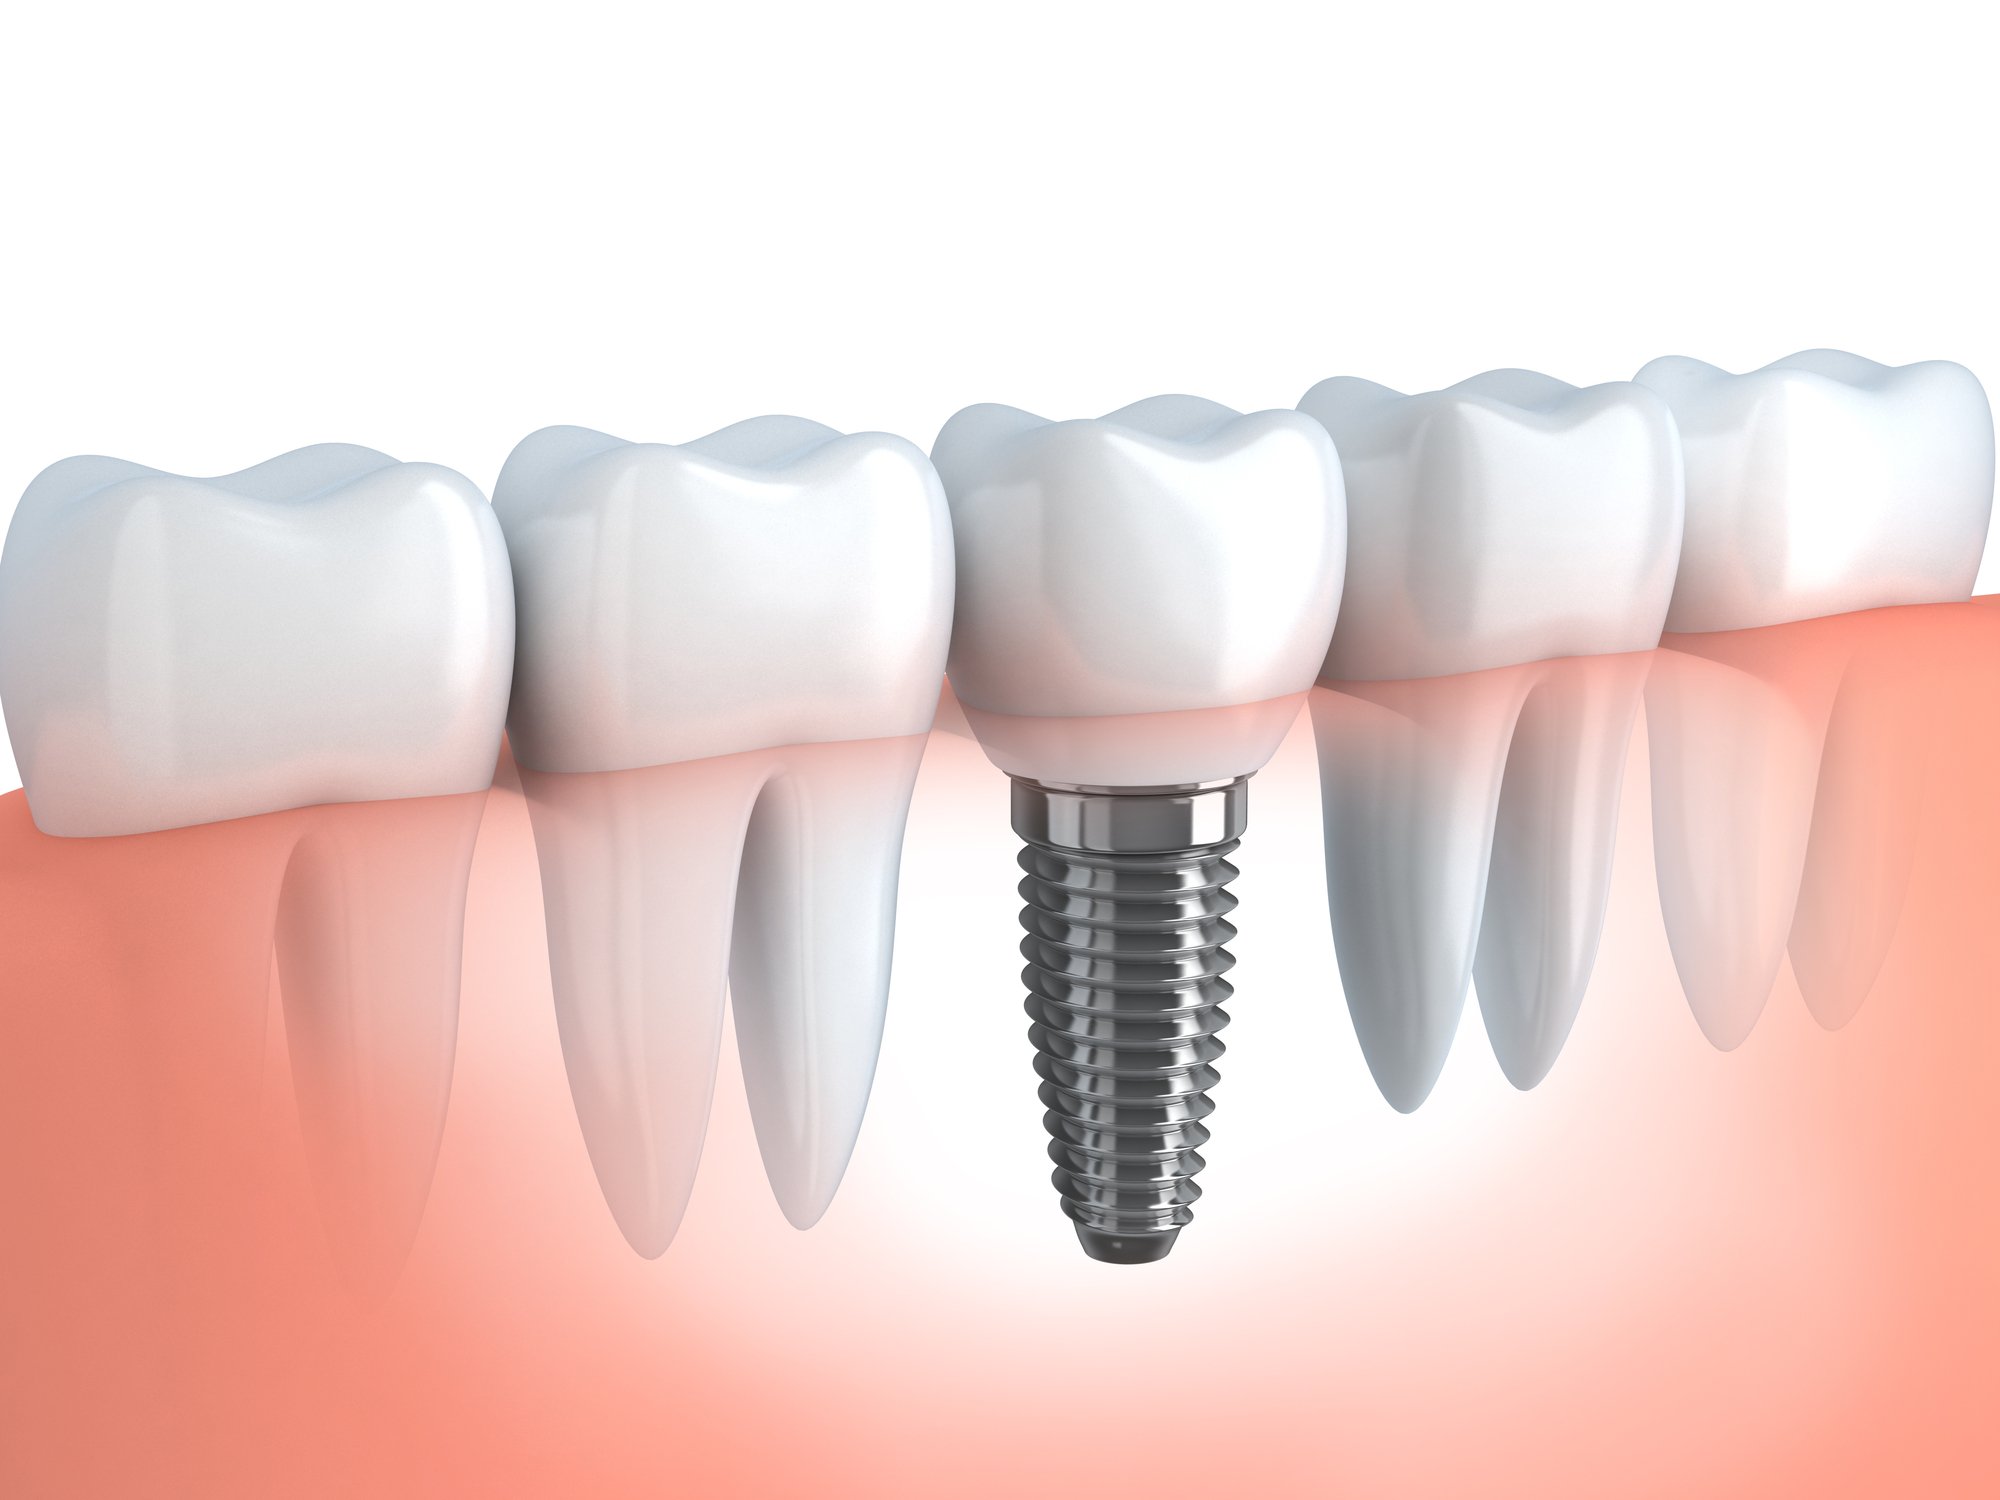 3D graphic of dental implant